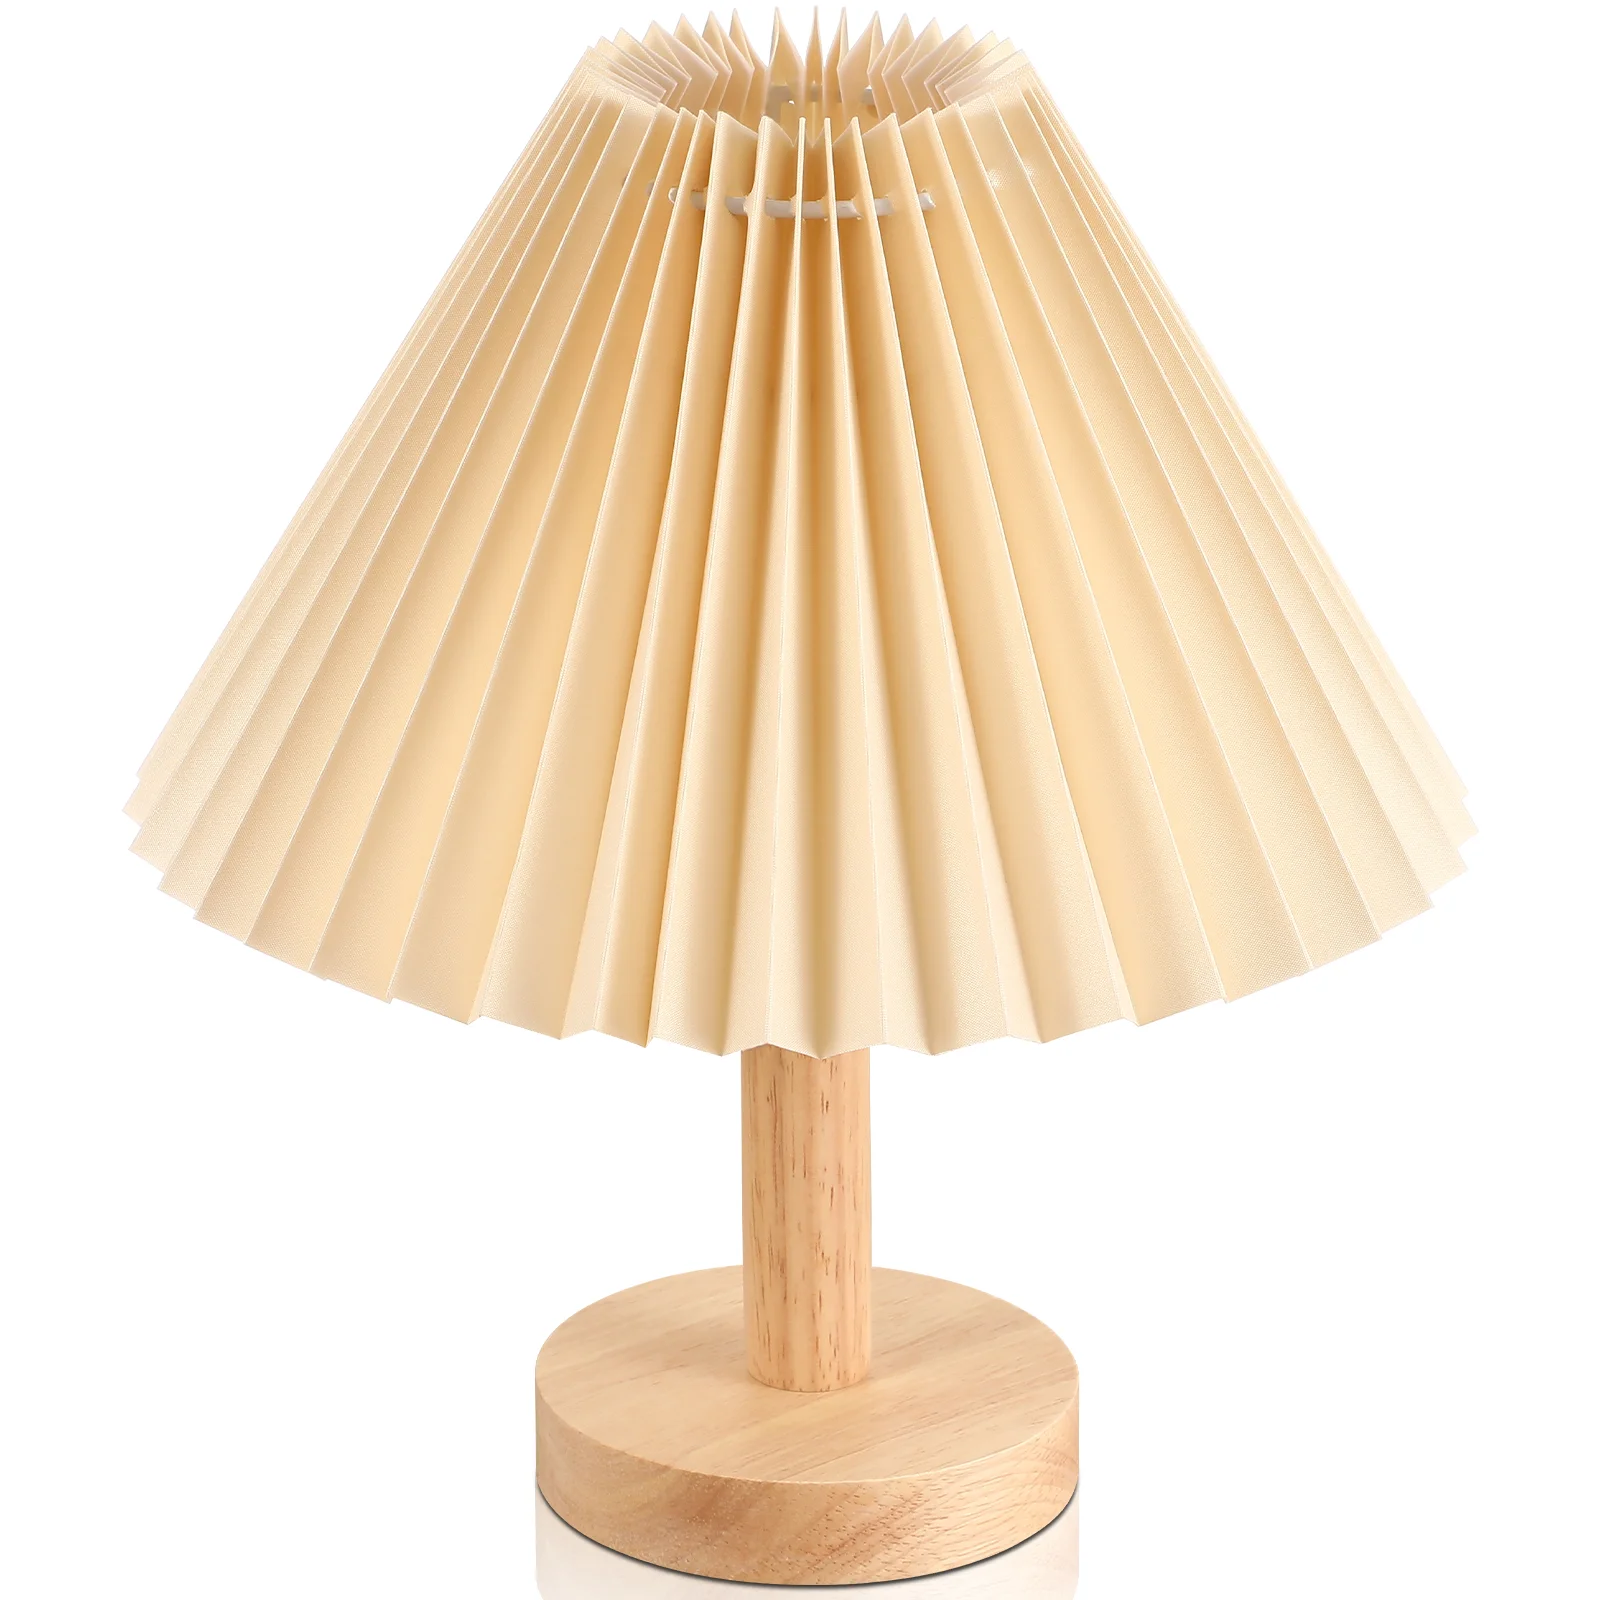 Floor Light Shade Lampshades Table Brentwood Collection Pleated Protector Cover Medium